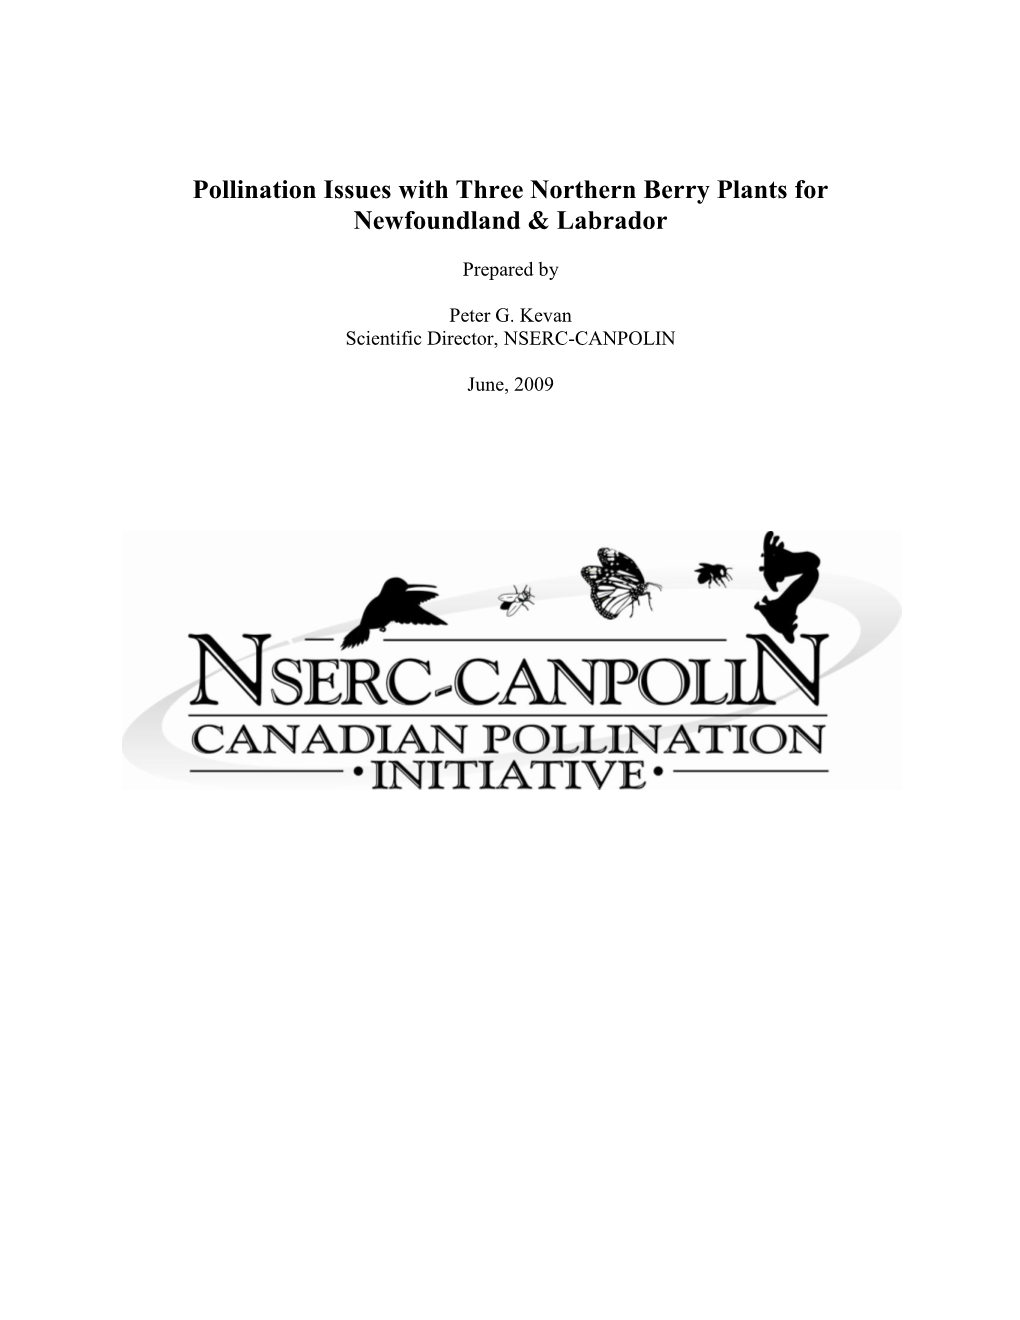 Pollination Issues with Three Northern Berry Plants for Newfoundland & Labrador